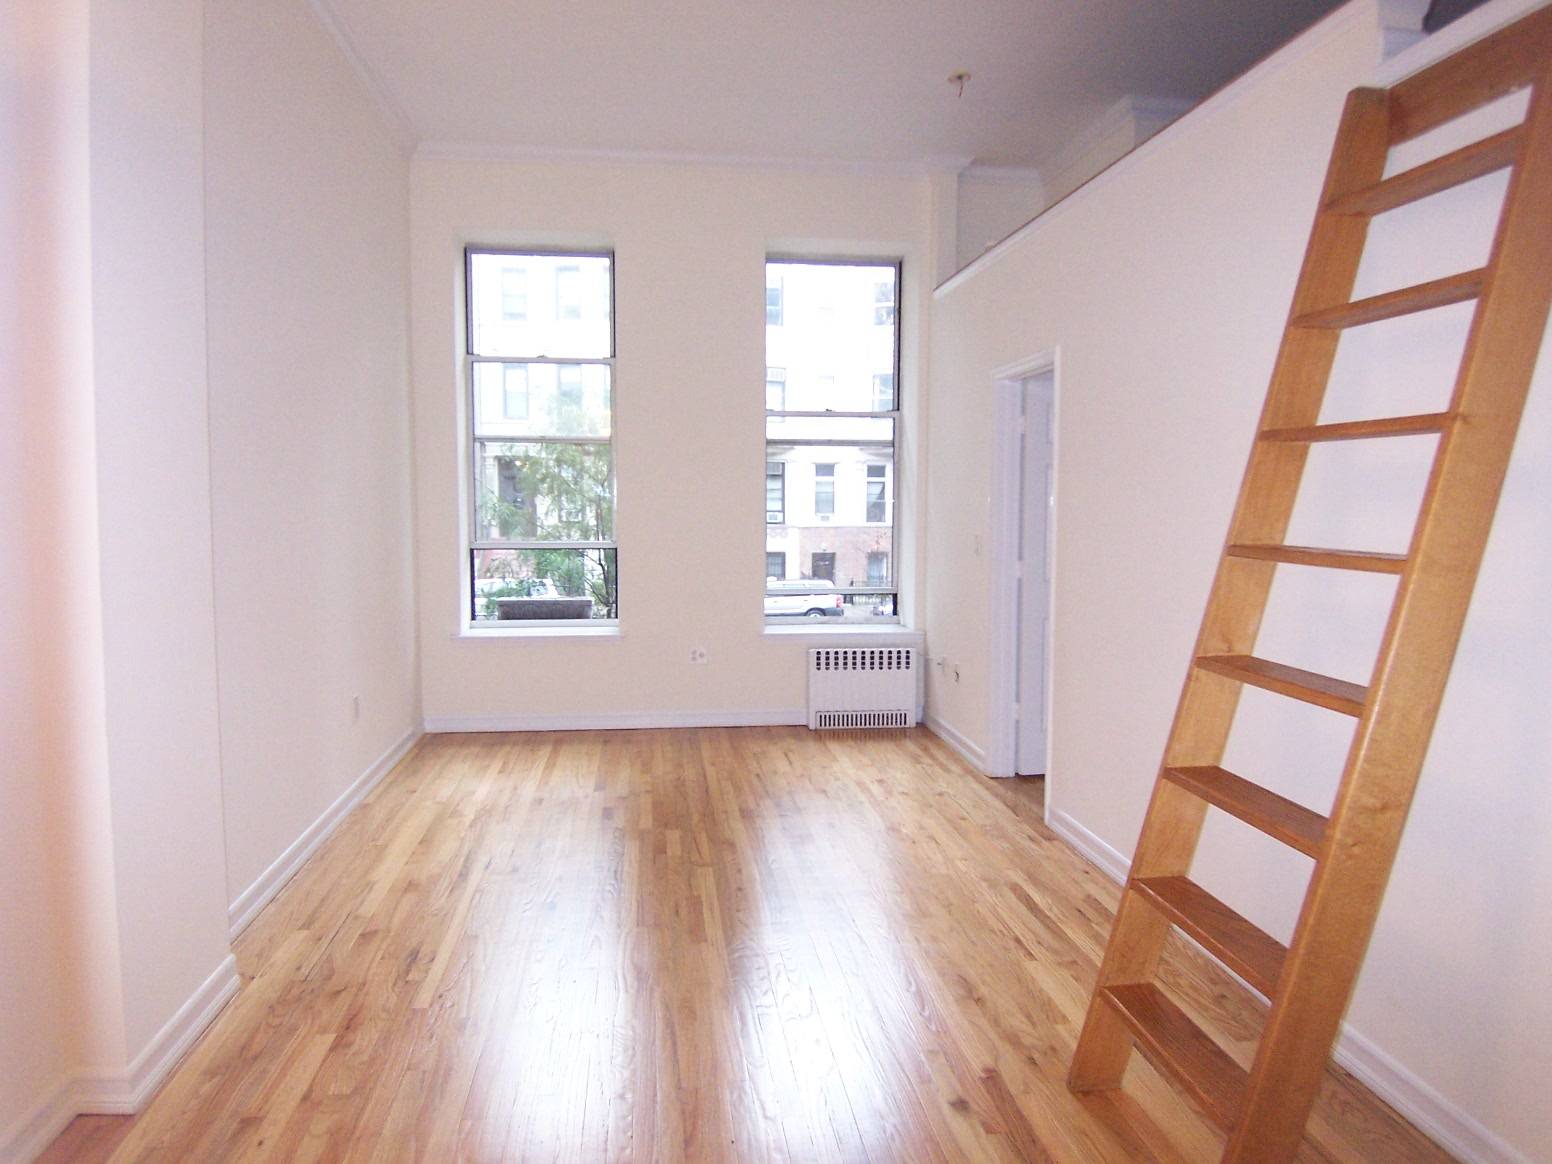 Upper West Side One Bedroom Condo Apartment for Sale  - Great location near Central Park - Good Investment Property!